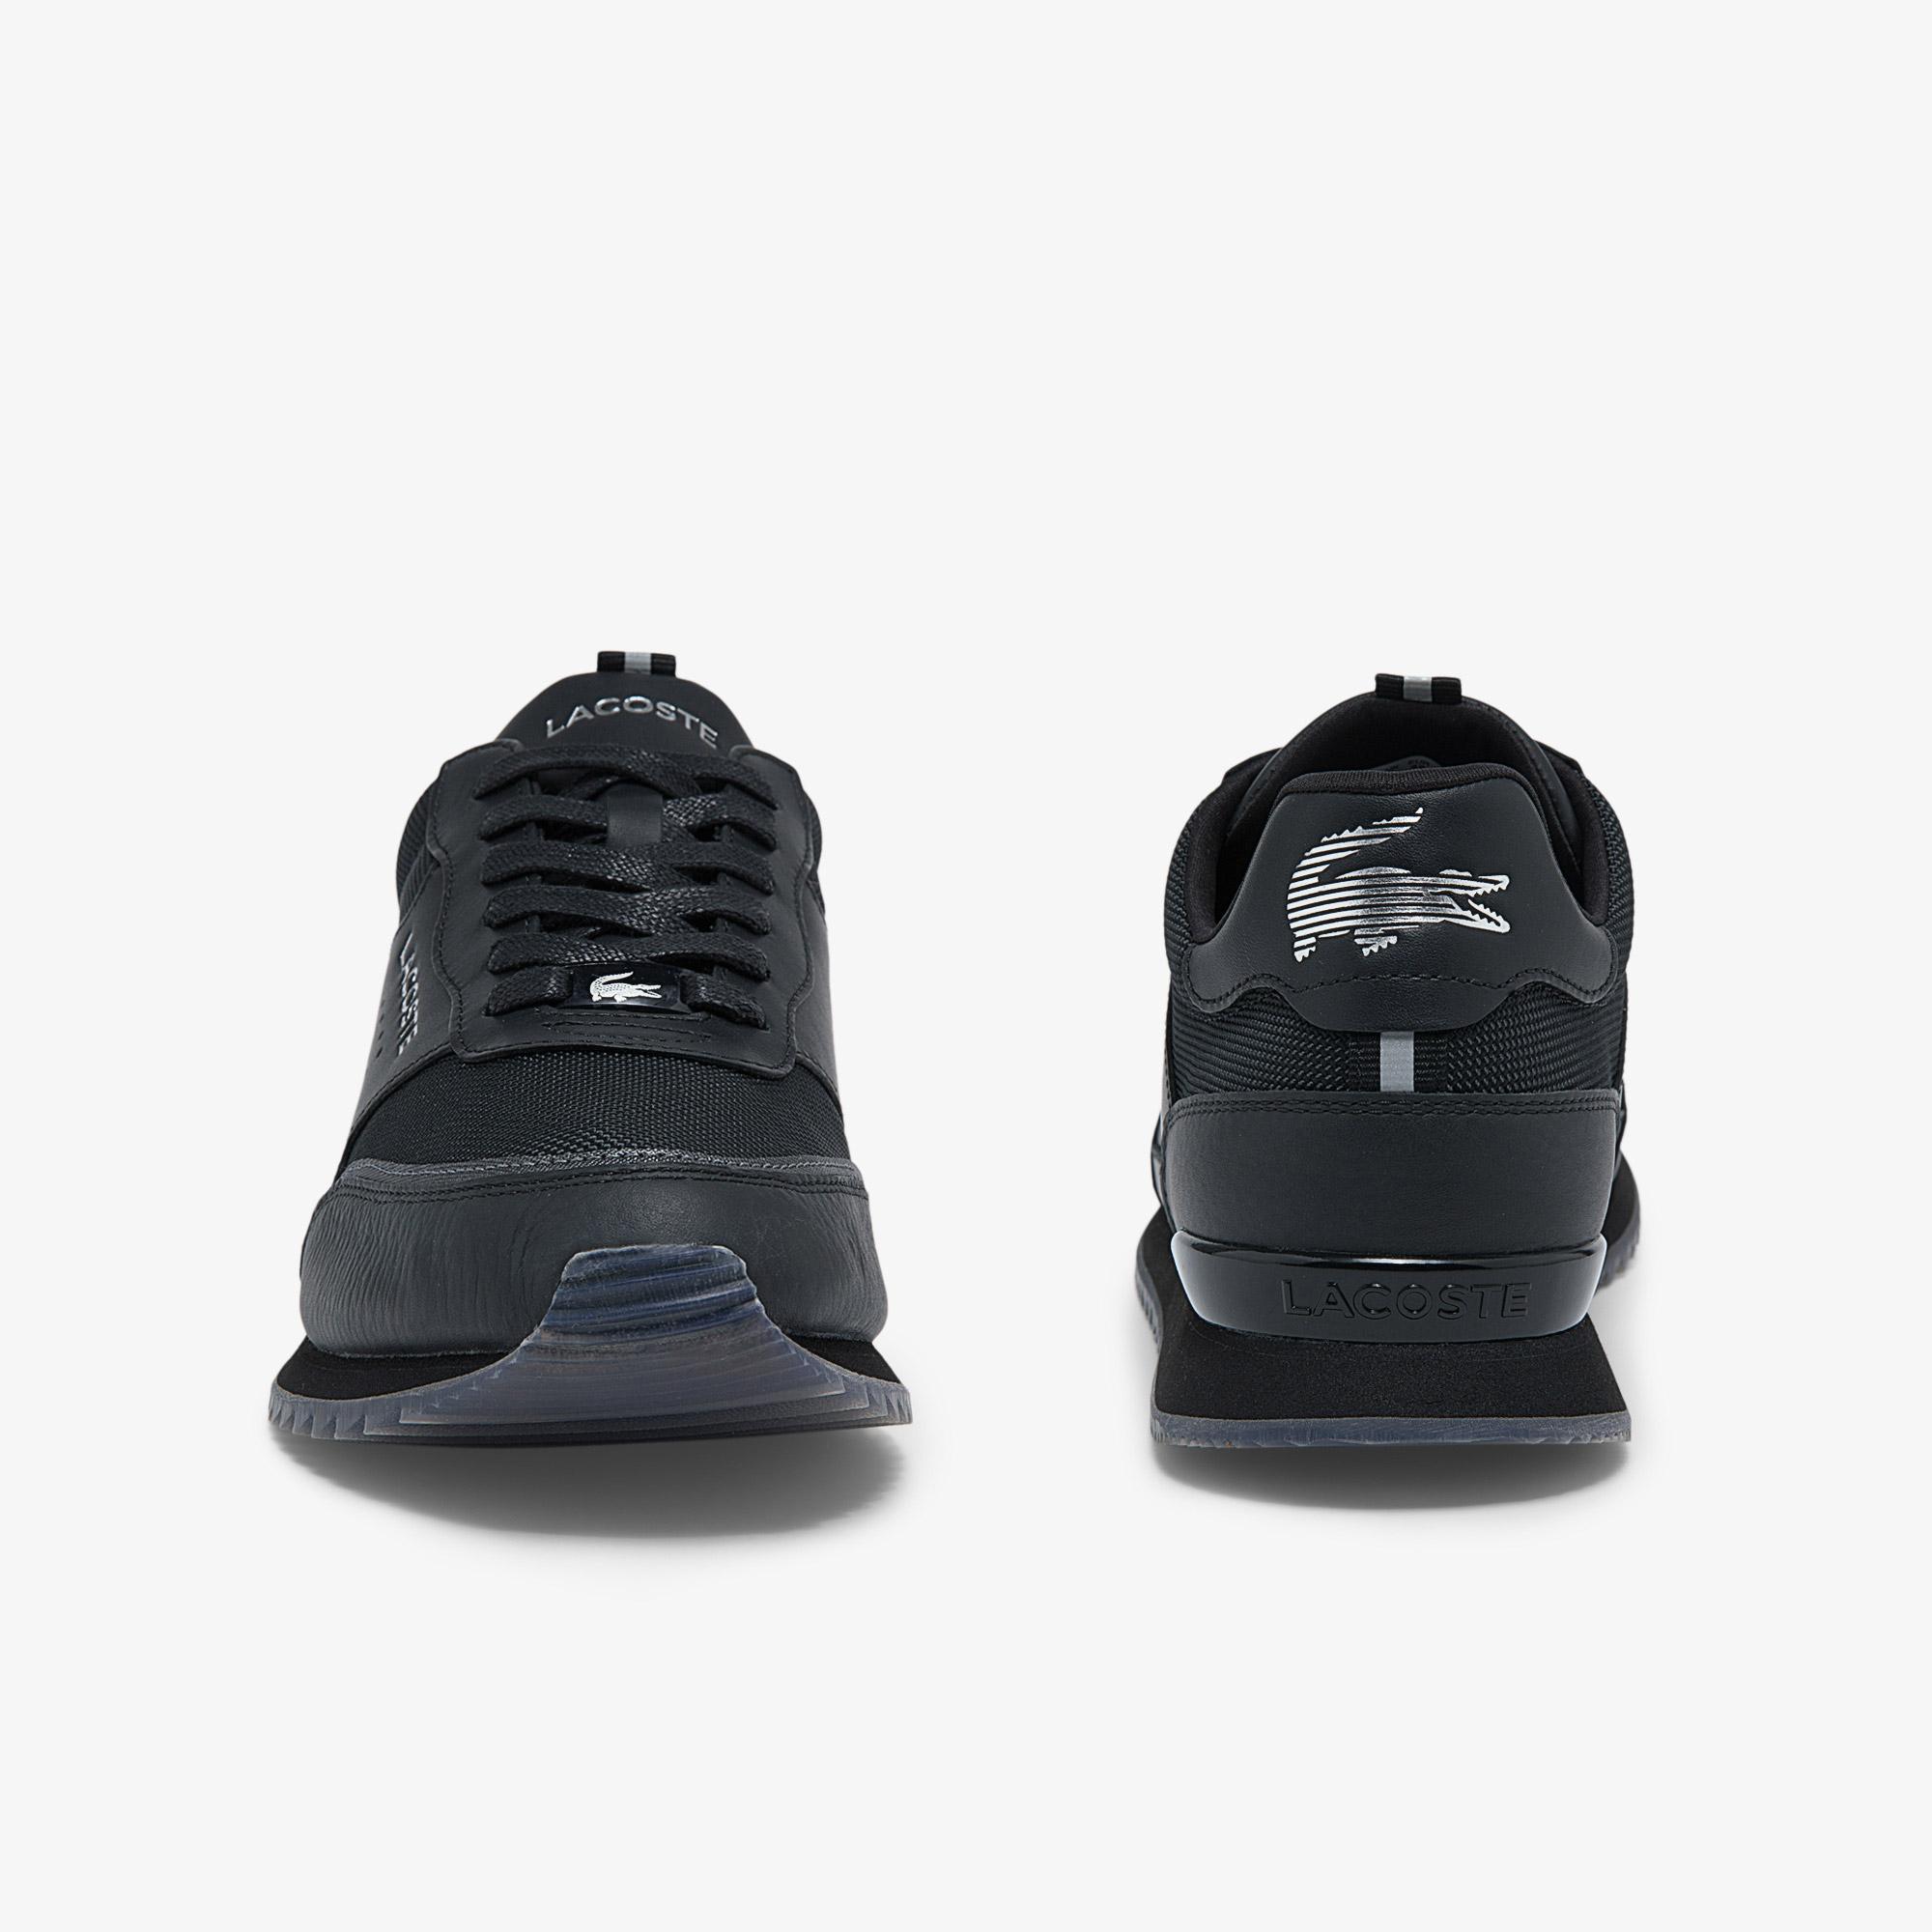 Lacoste Men's Partner Luxe Textile and Leather Sneakers